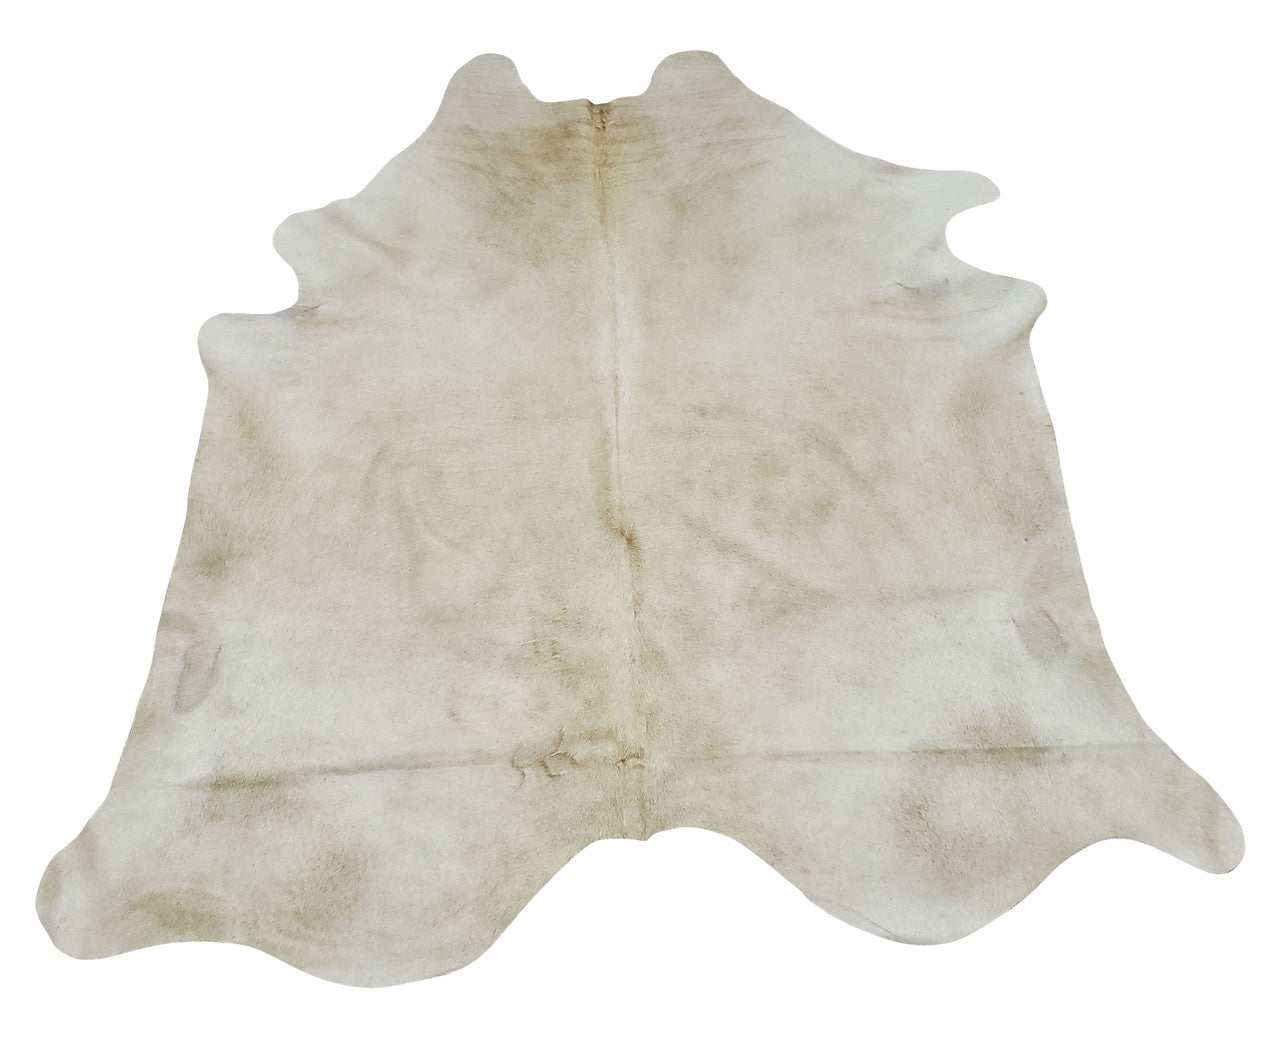 My beloved cowhide rug is absolutely beautiful. It makes my bedroom look stunning with beautiful shades of beige color.
